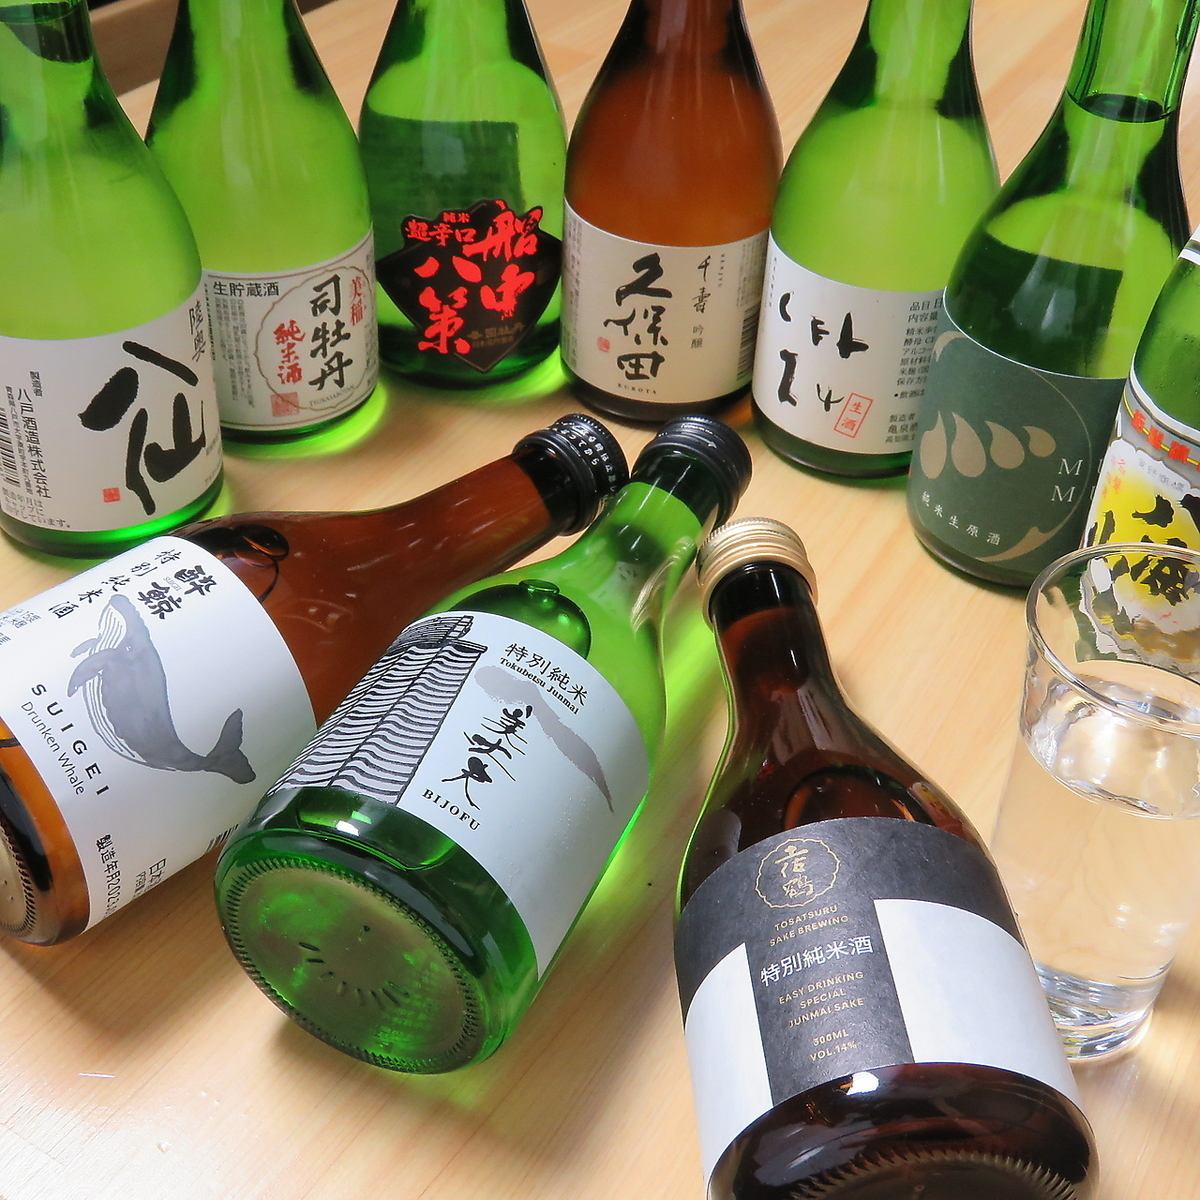 We offer all-you-can-drink items! With your favorite tempura and your favorite alcohol♪